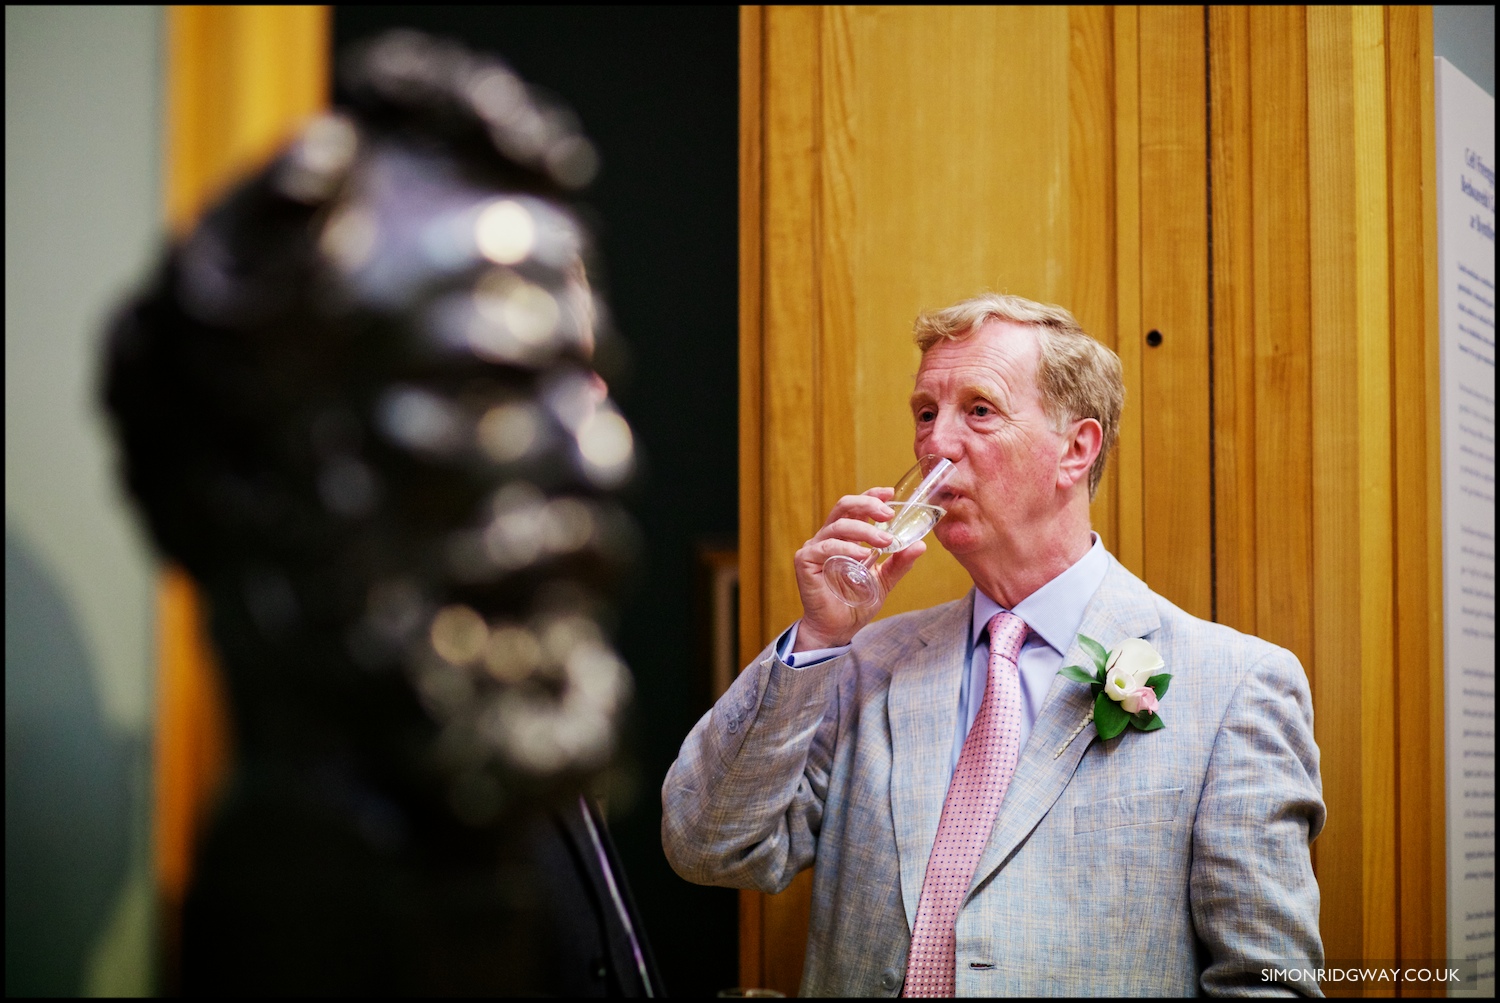 Wedding photography at Cardiff City Hall and National Museum of Wales